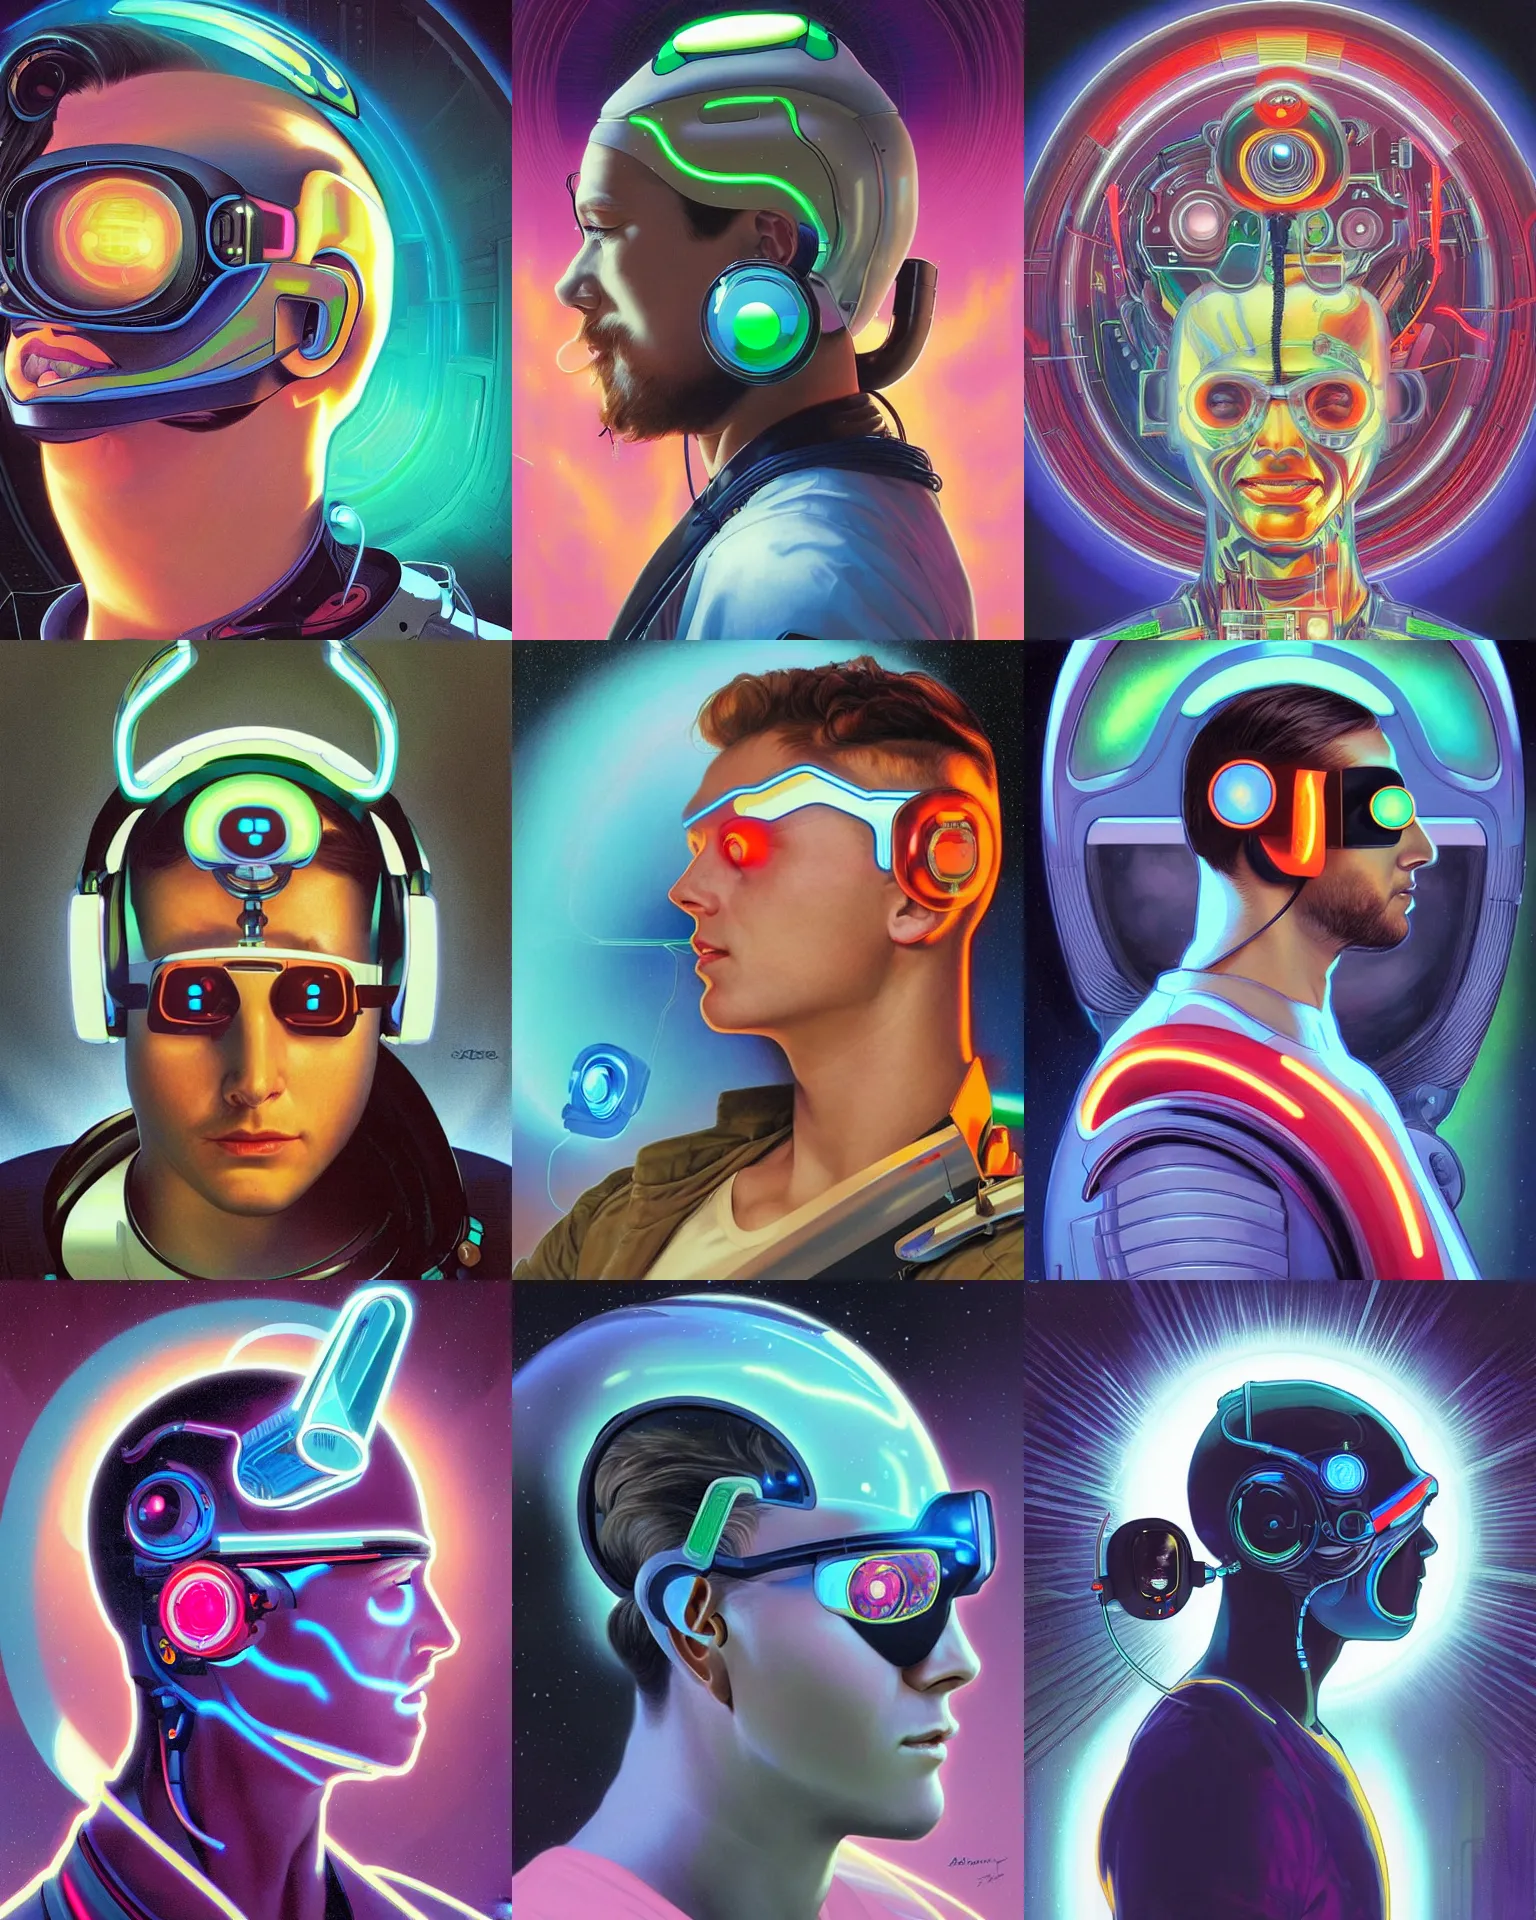 Prompt: side view future coder man, sleek cyclops display over eyes and glowing headset, neon accents, holographic colors, desaturated headshot portrait digital painting by alex grey, alphonse mucha, donoto giancola, dean cornwall, rhads, john berkey, tom whalen, astronaut cyberpunk electric lights profile